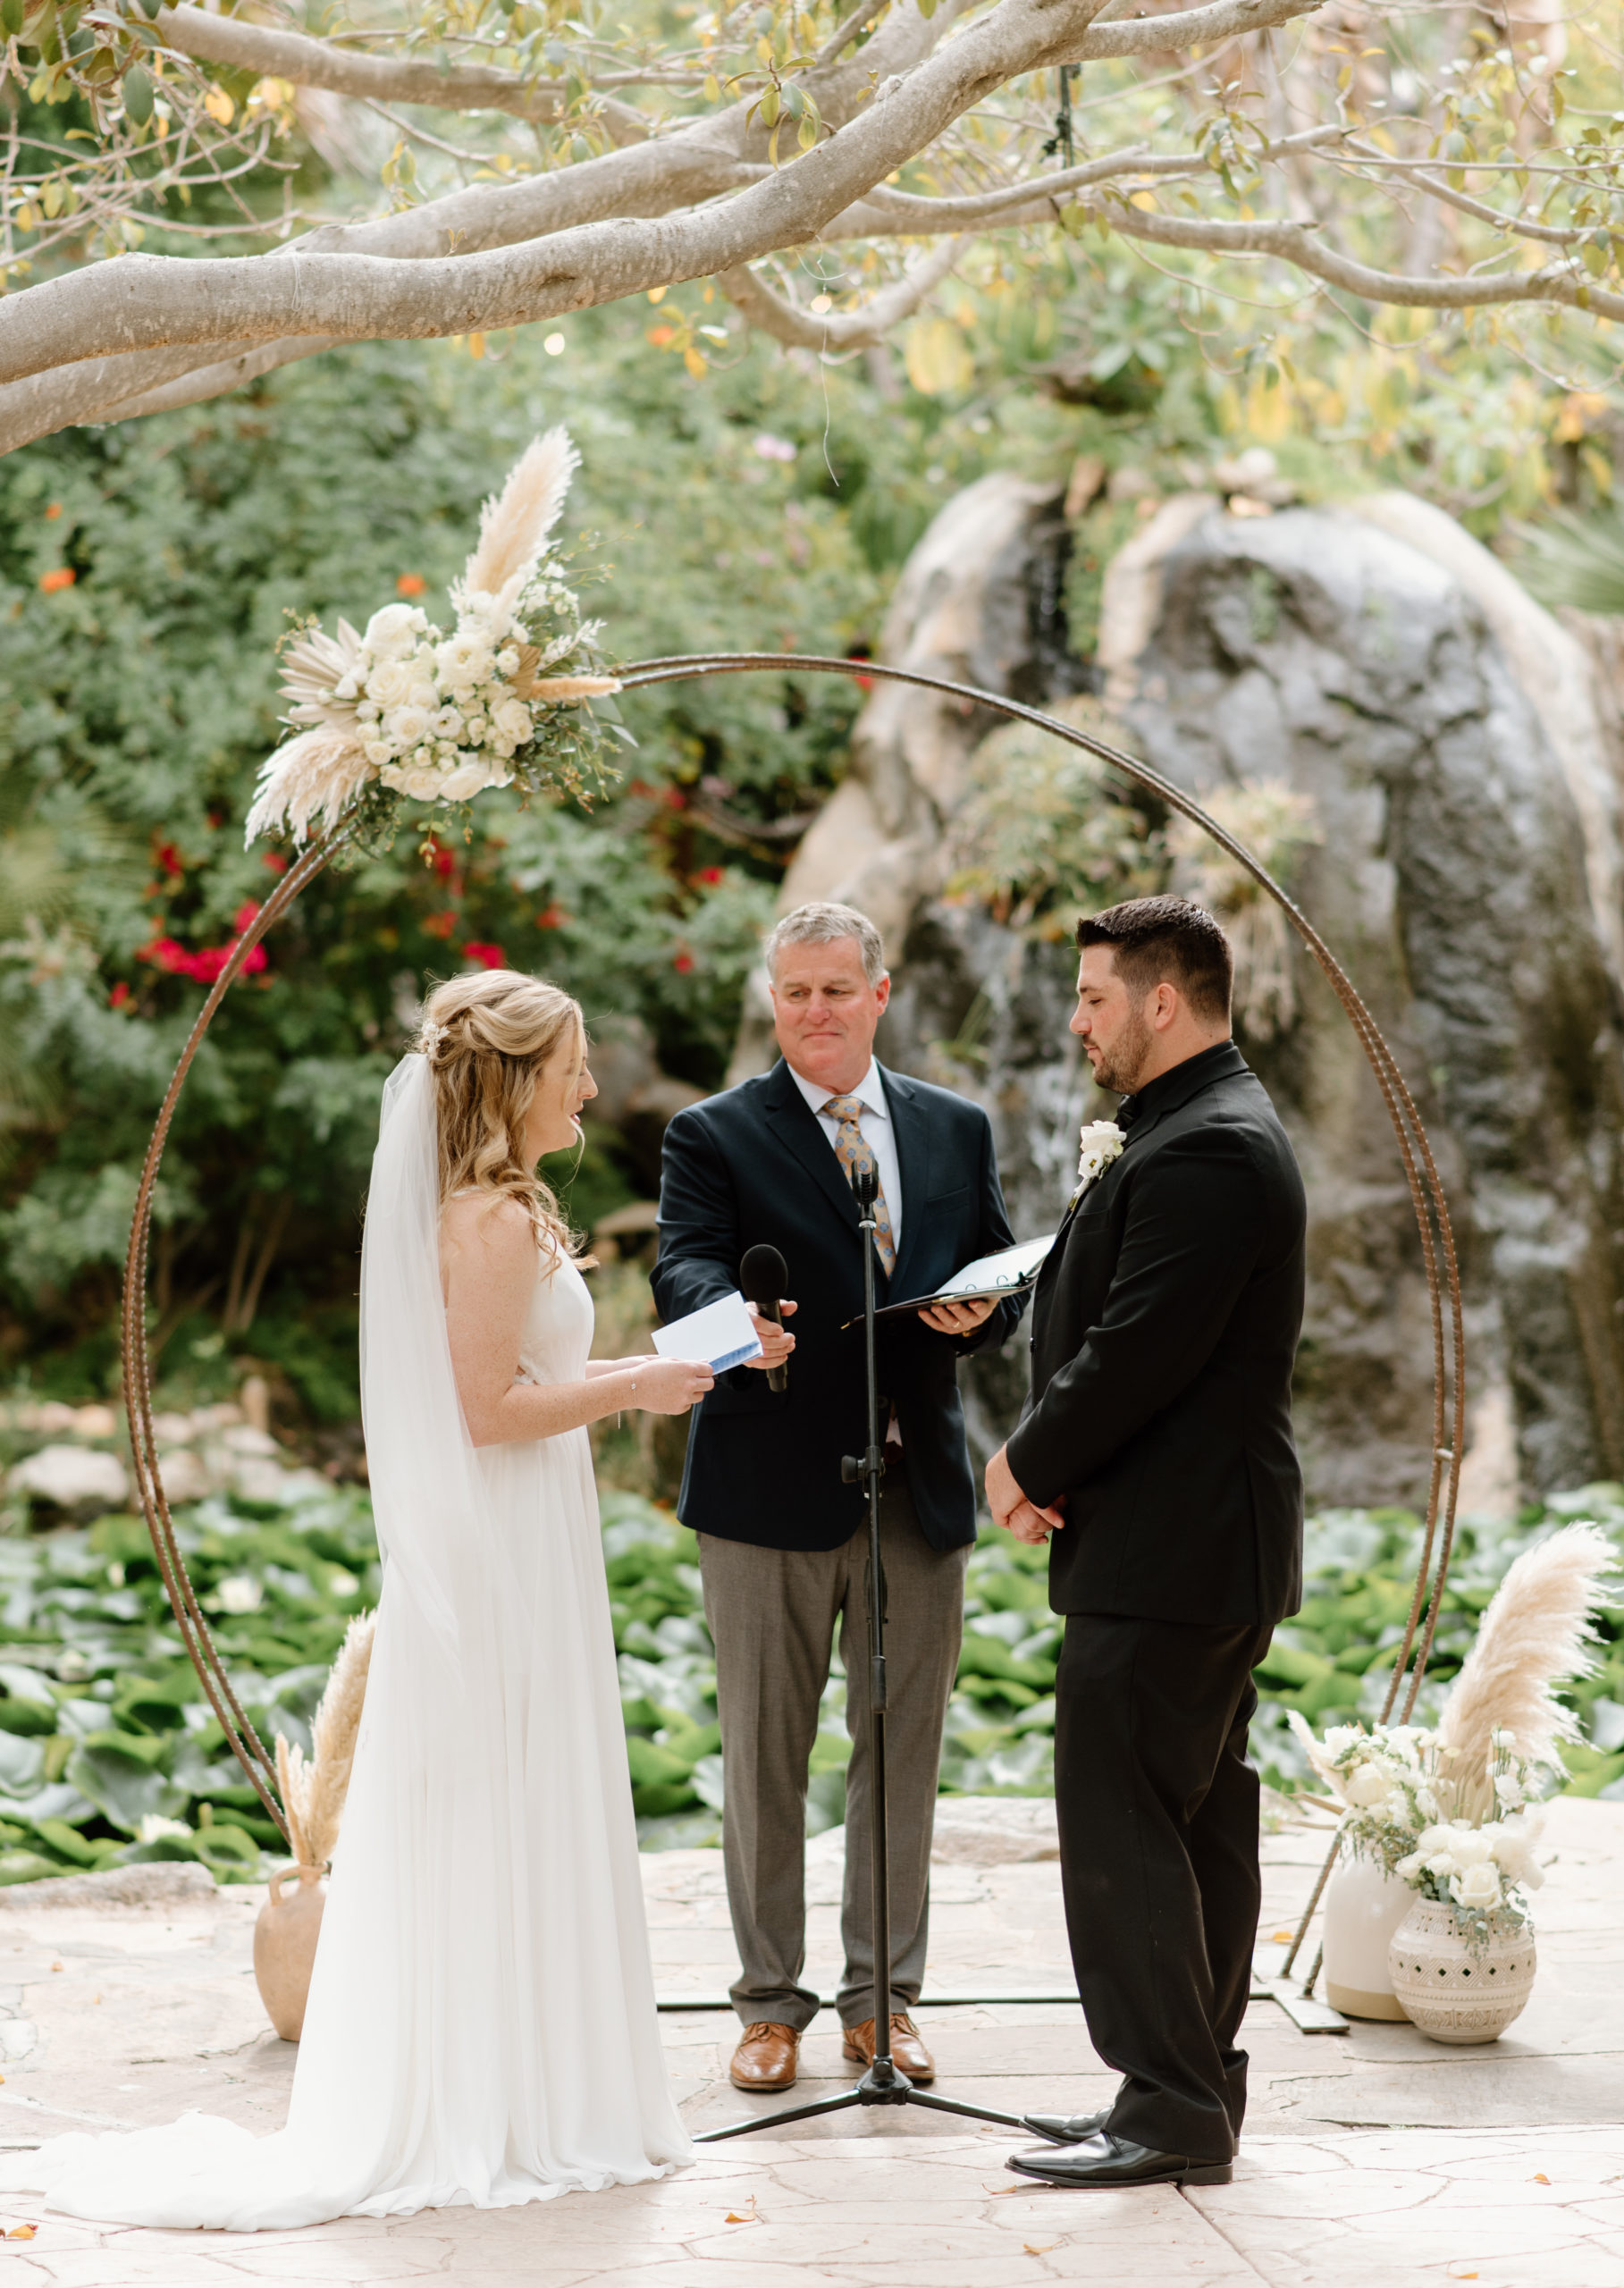 Brooke and Jayden saying their vows on their wedding day at the Botanica Oceanside